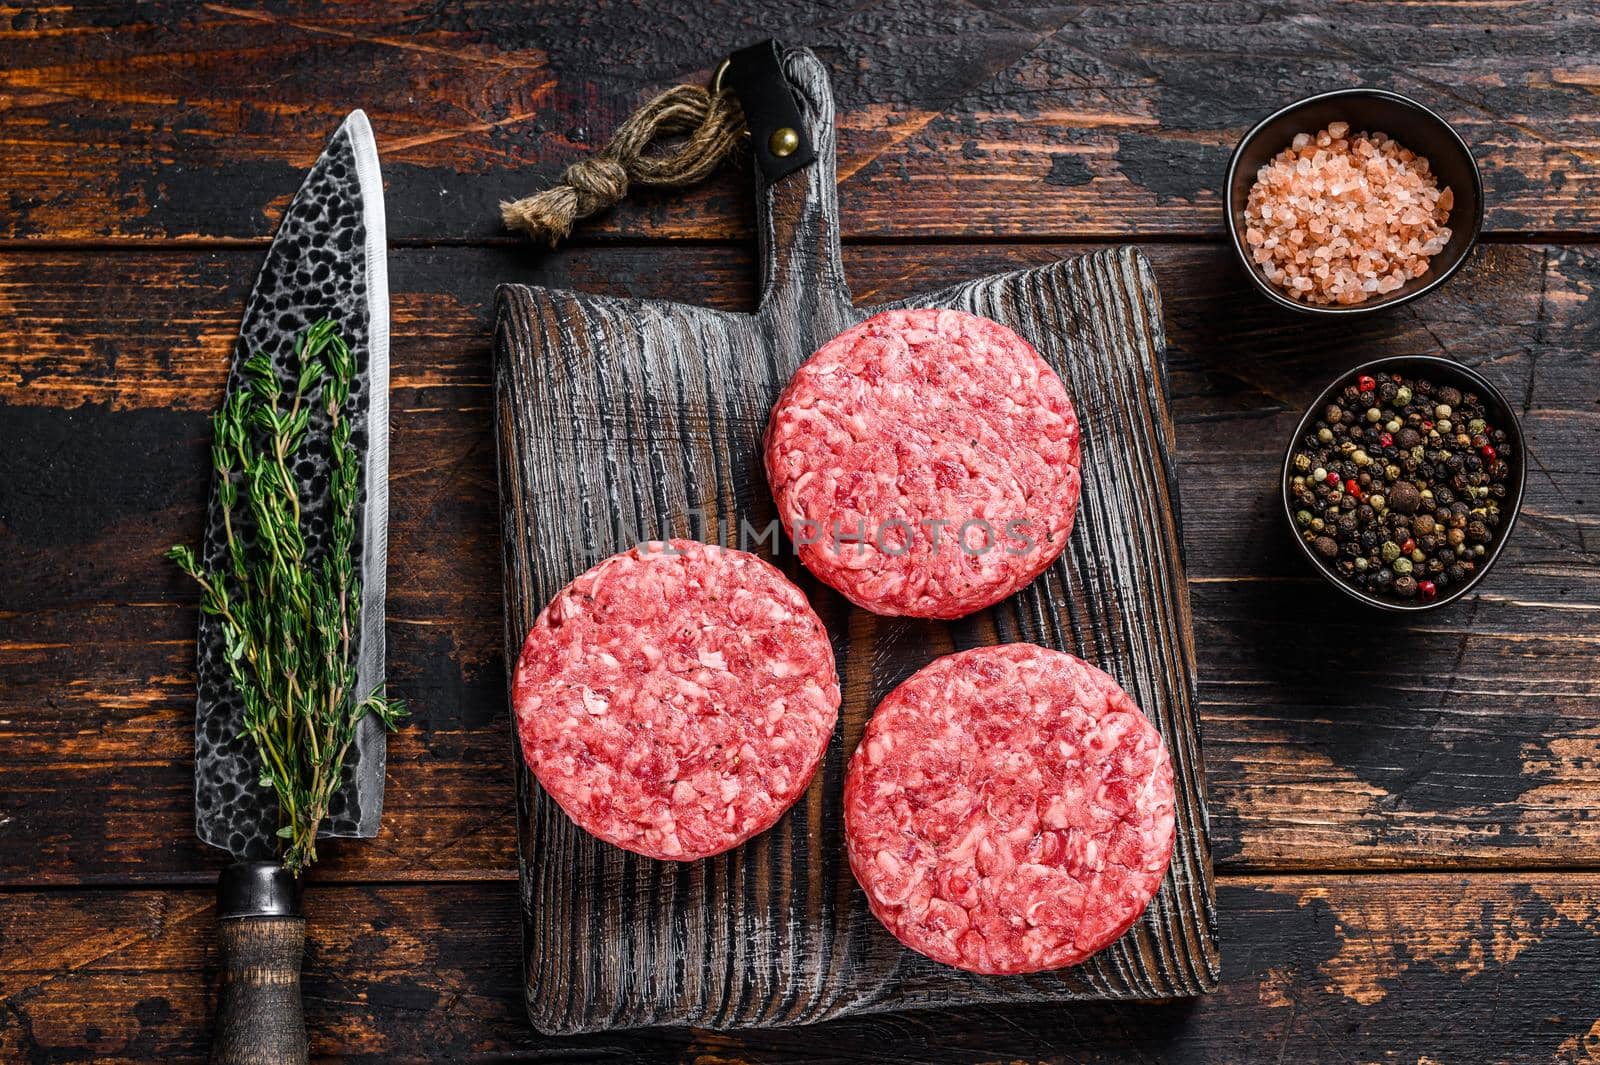 Raw steak burgers patties with ground beef and thyme on a wooden cutting board. Dark Wooden background. Top view.